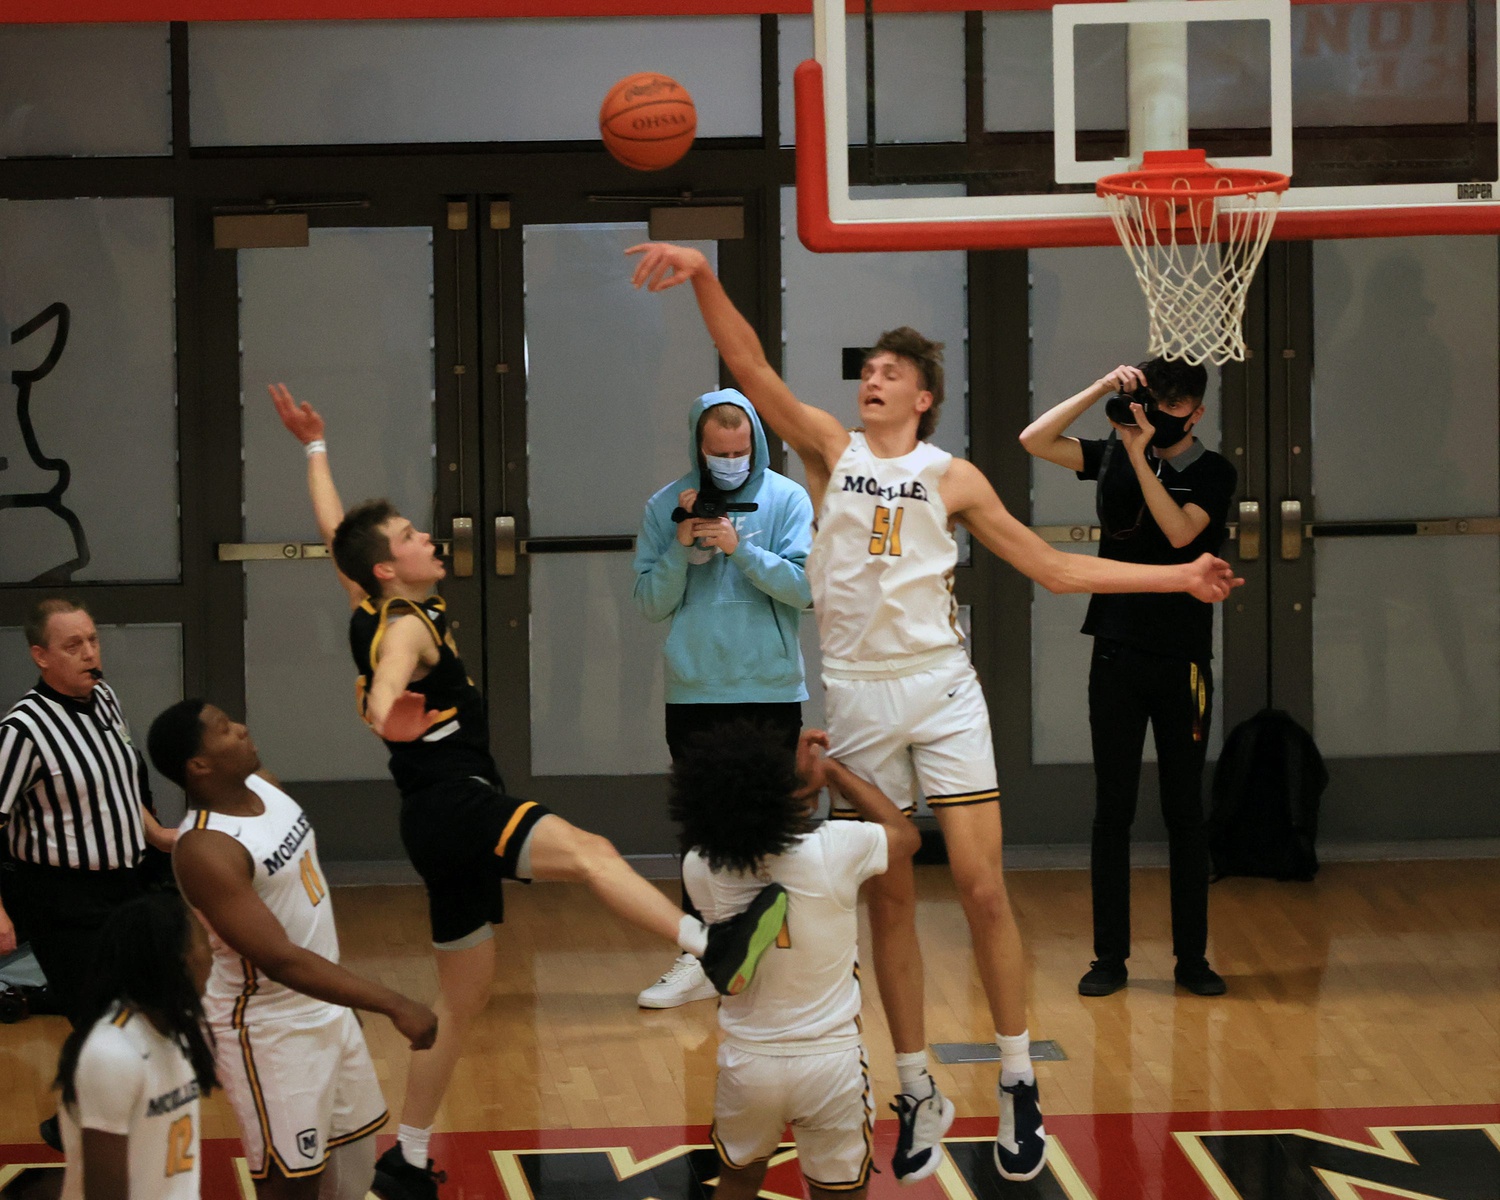 Cincinnati Moeller center Logan Duncomb blocks the shot of Centerville's Gabe Cupps in the Division I regional finals game between Moeller and Centerville at Princeton High School on March 13, 2021. (Jim Owens/USA TODAY Sports)